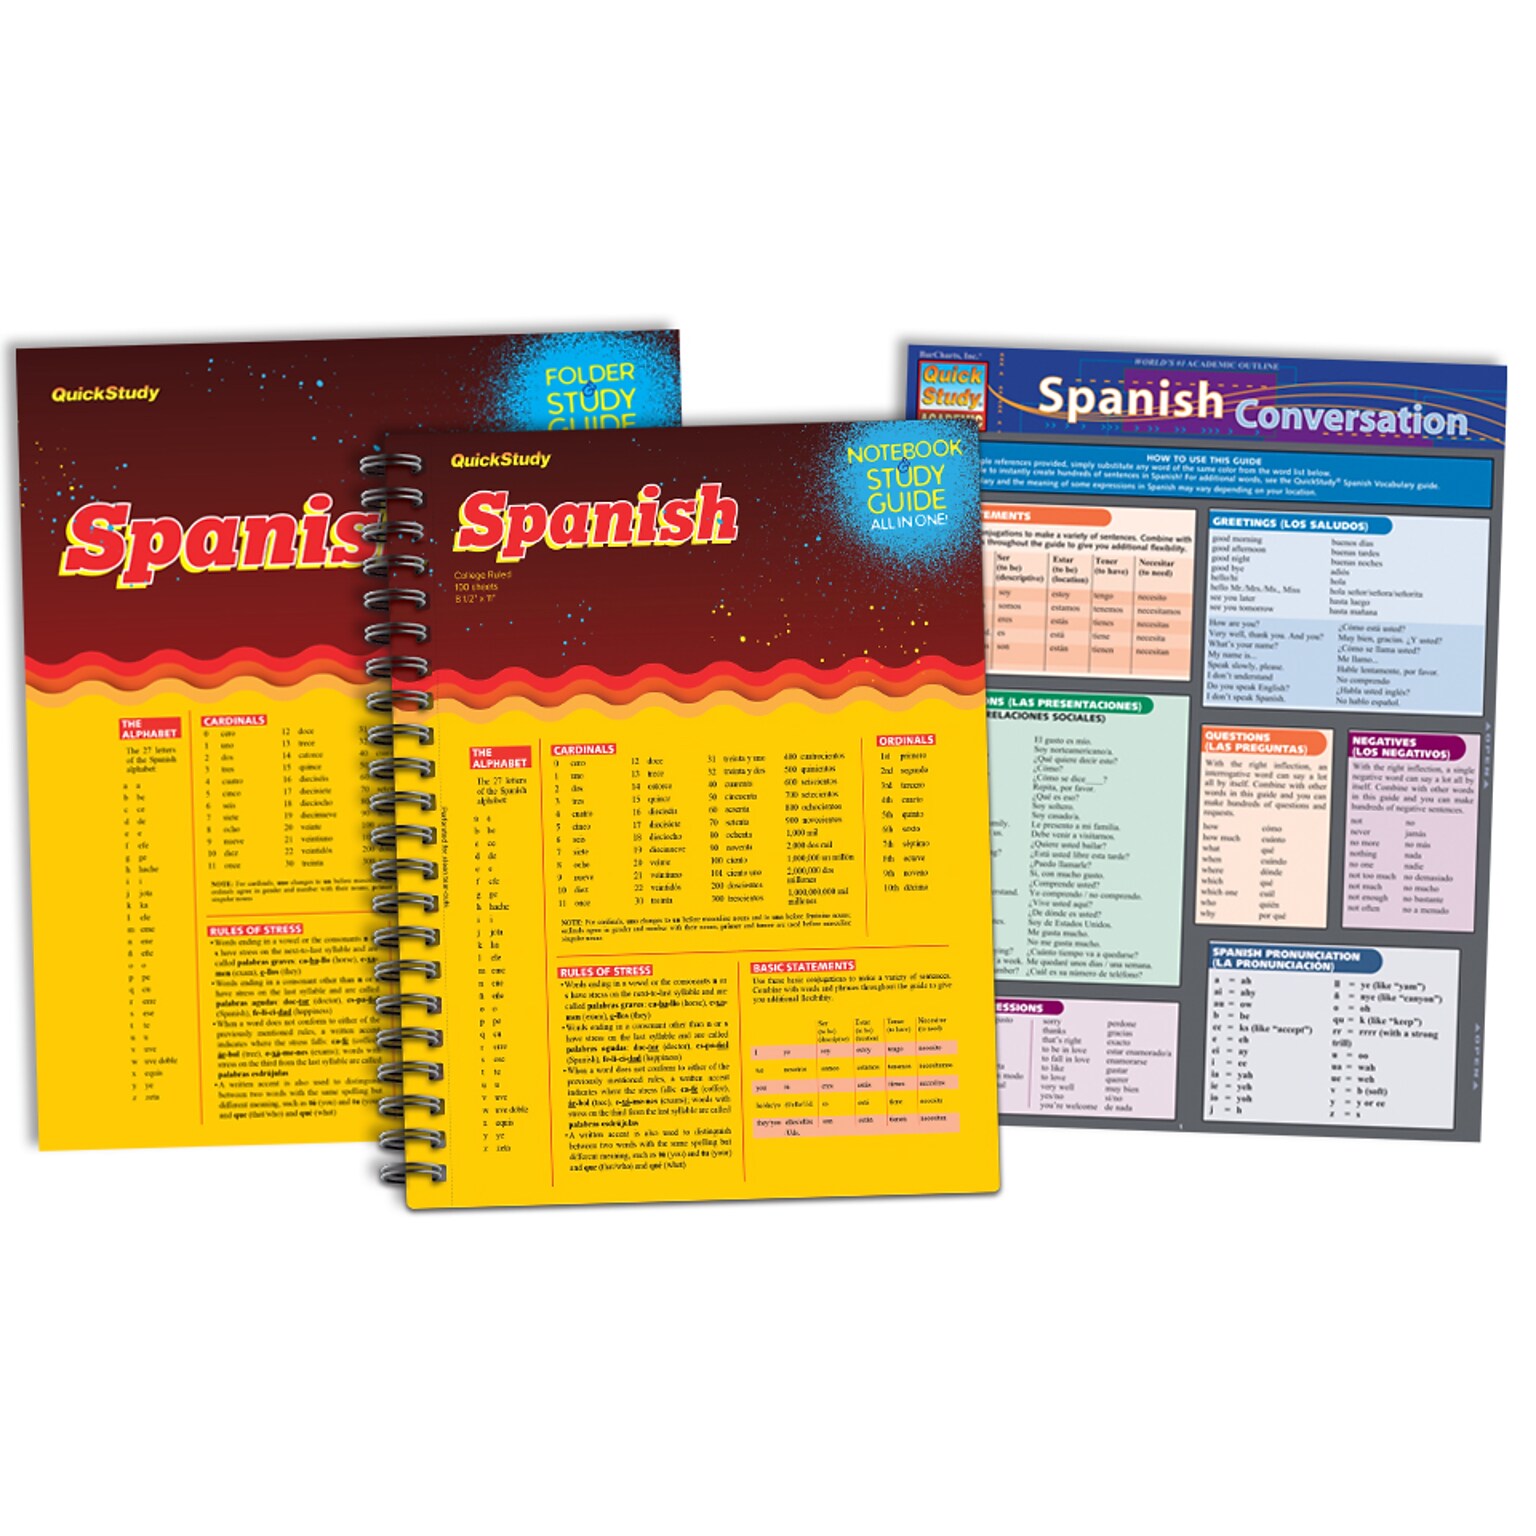 Quickstudy Spanish Reference Pack (238072)